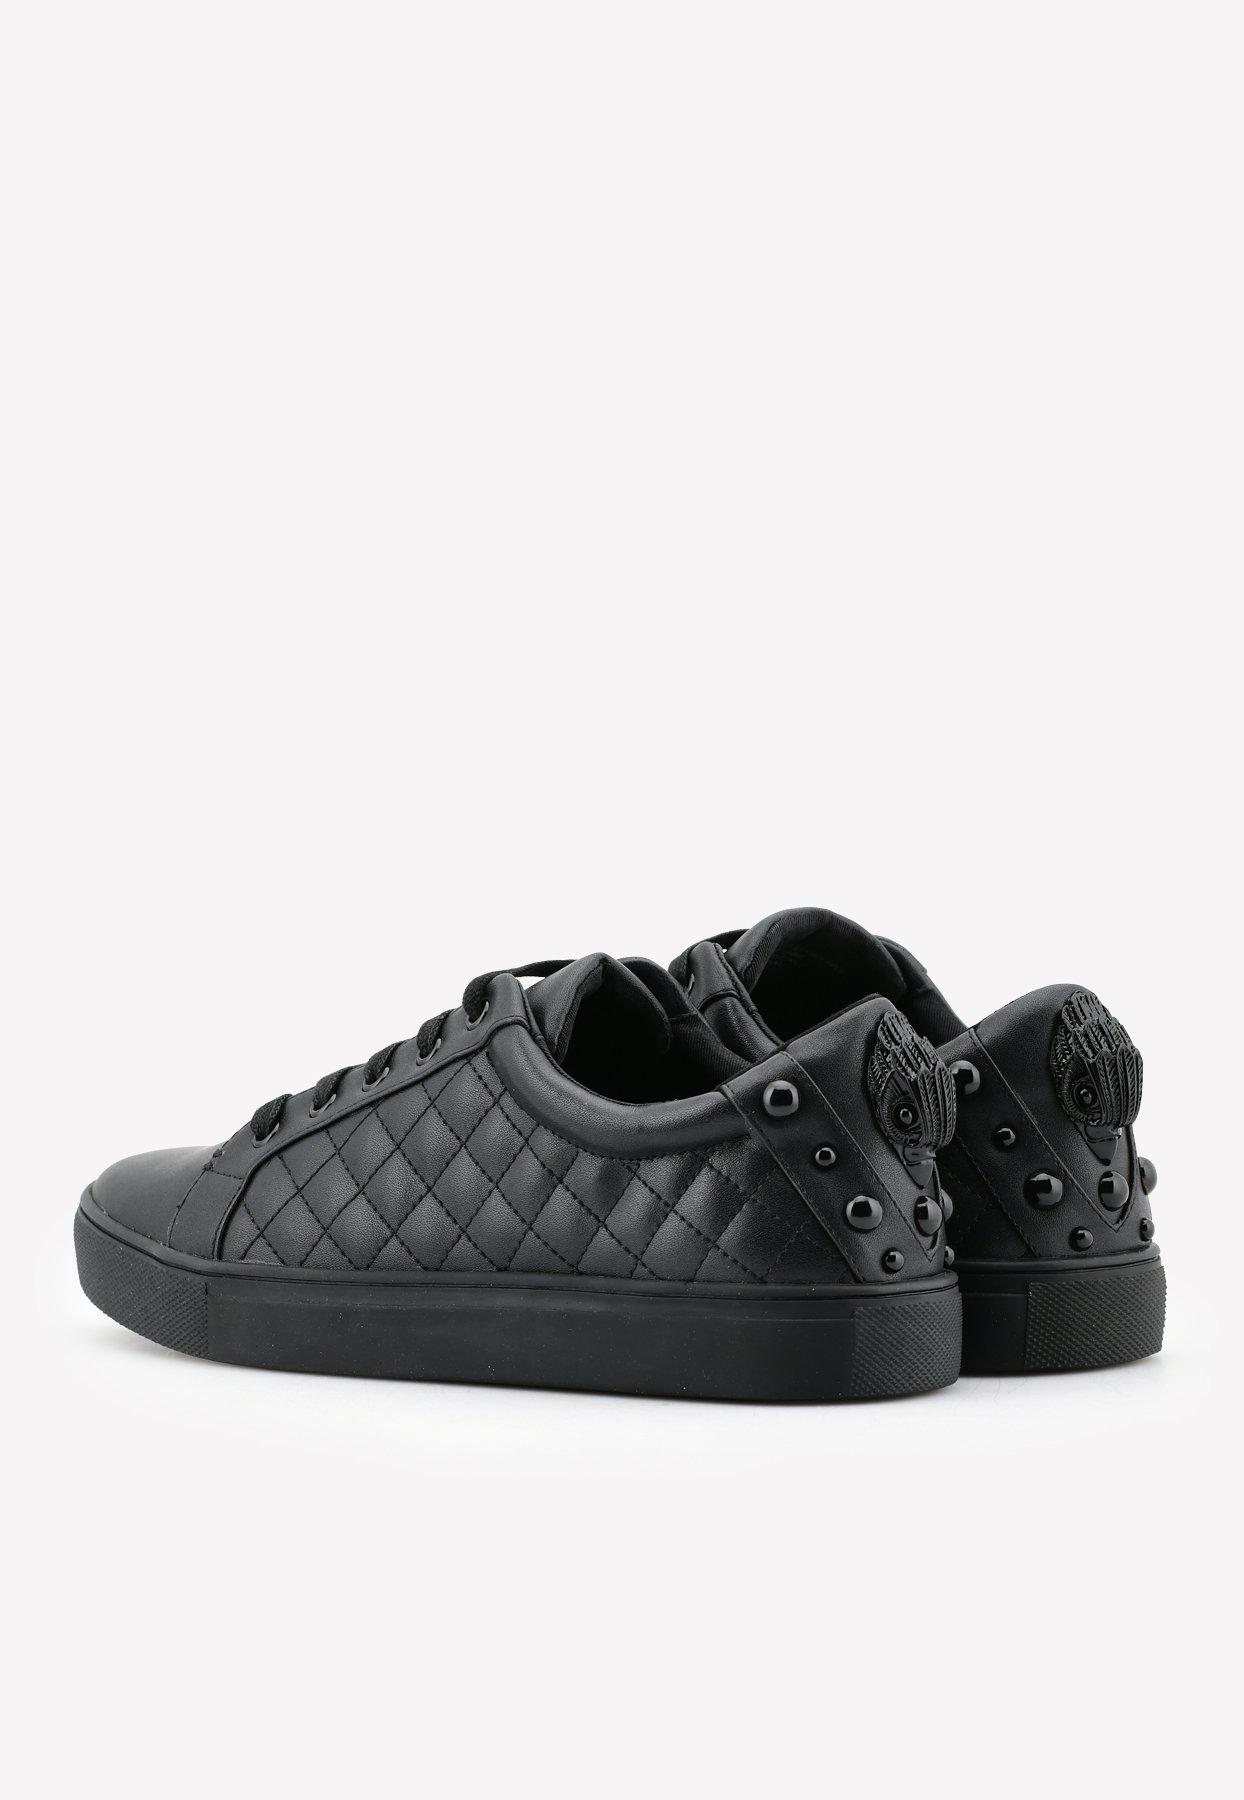 Kurt Geiger Ludo Drench Quilted Leather Sneakers Eu 38 in Black | Lyst